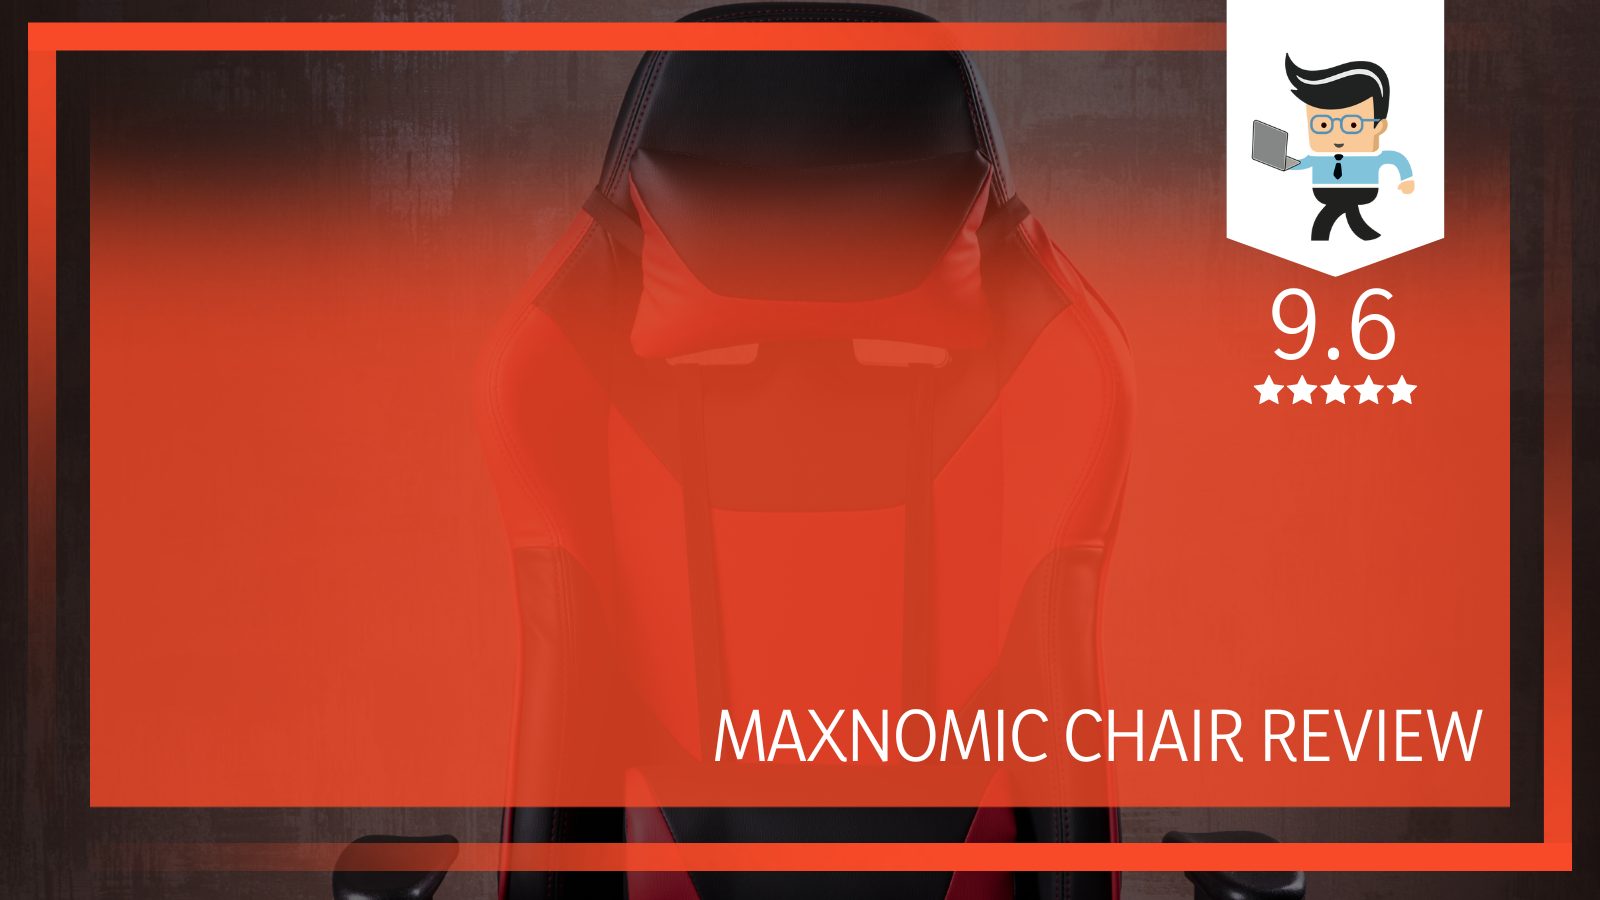 Maxnomic chair review